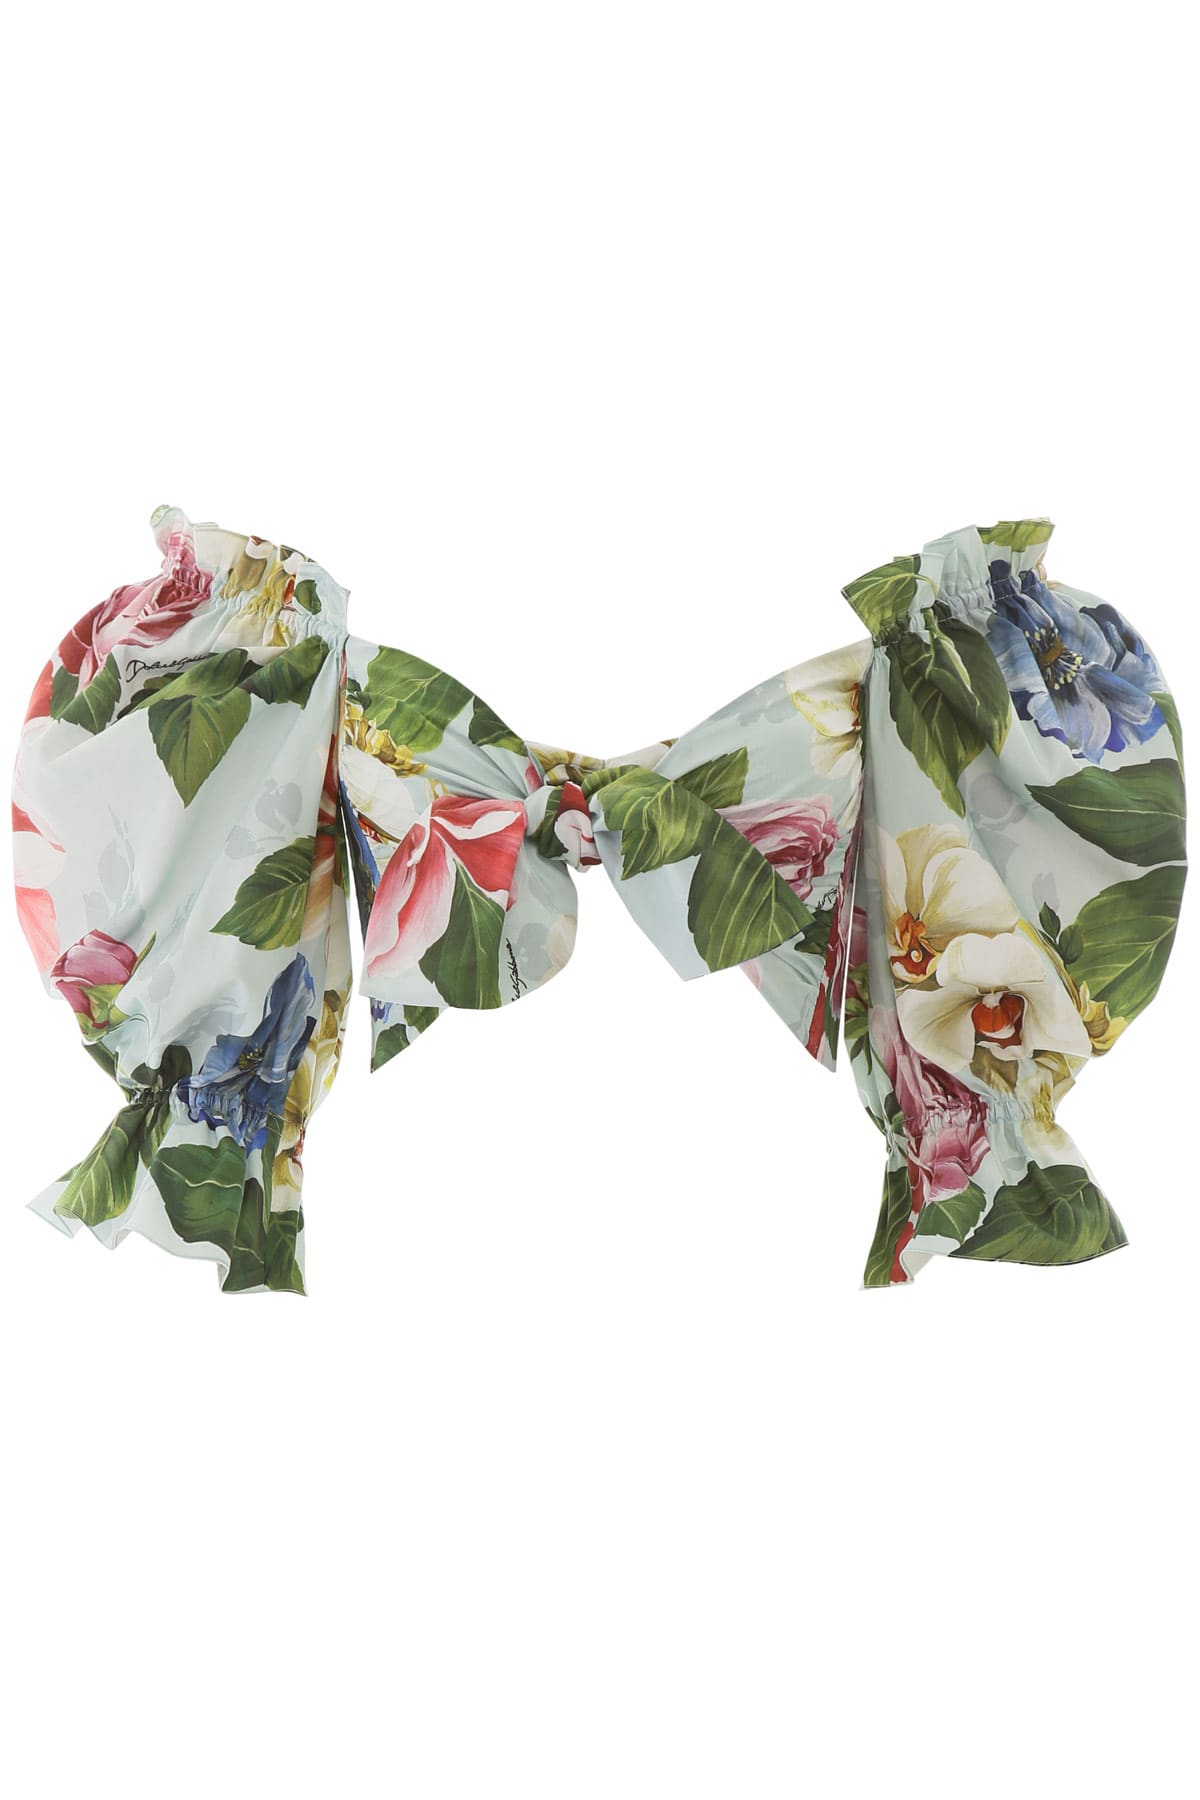 DOLCE & GABBANA FLORAL TOP WITH BOW,11315010